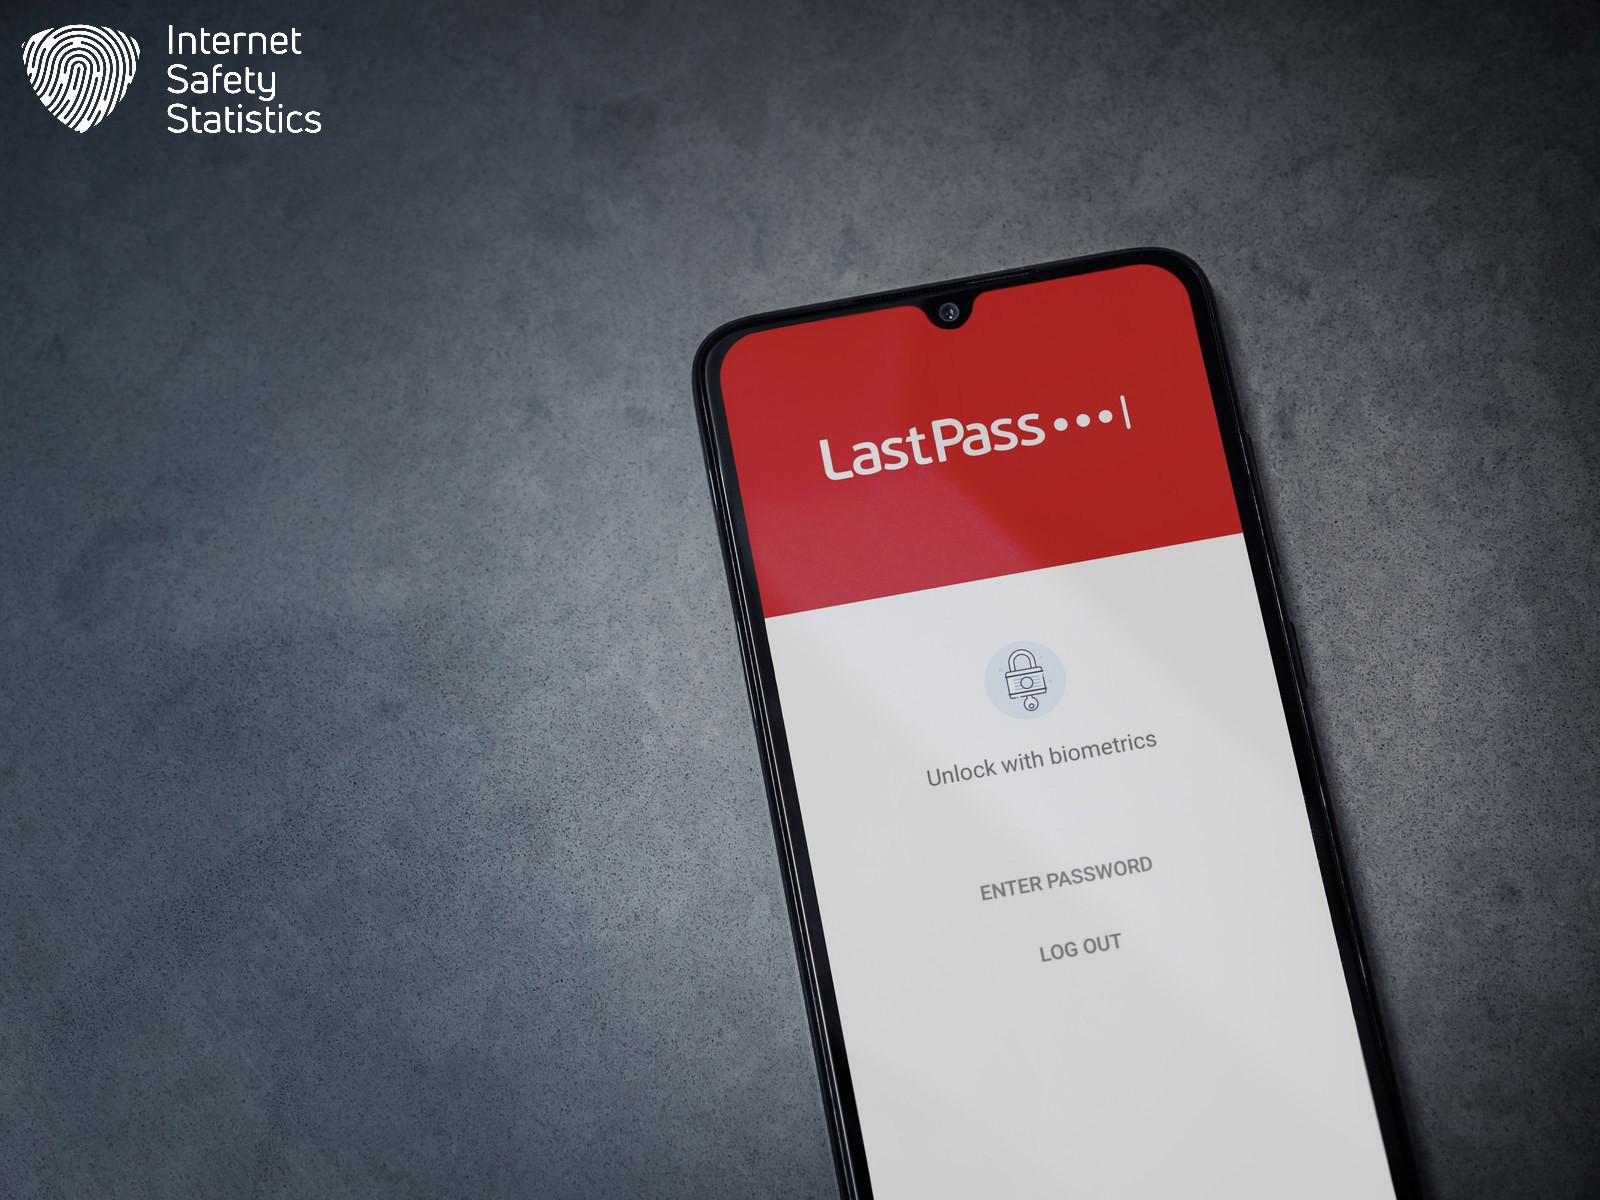 Sticky Password vs LastPass - LastPass is a well-established password manager